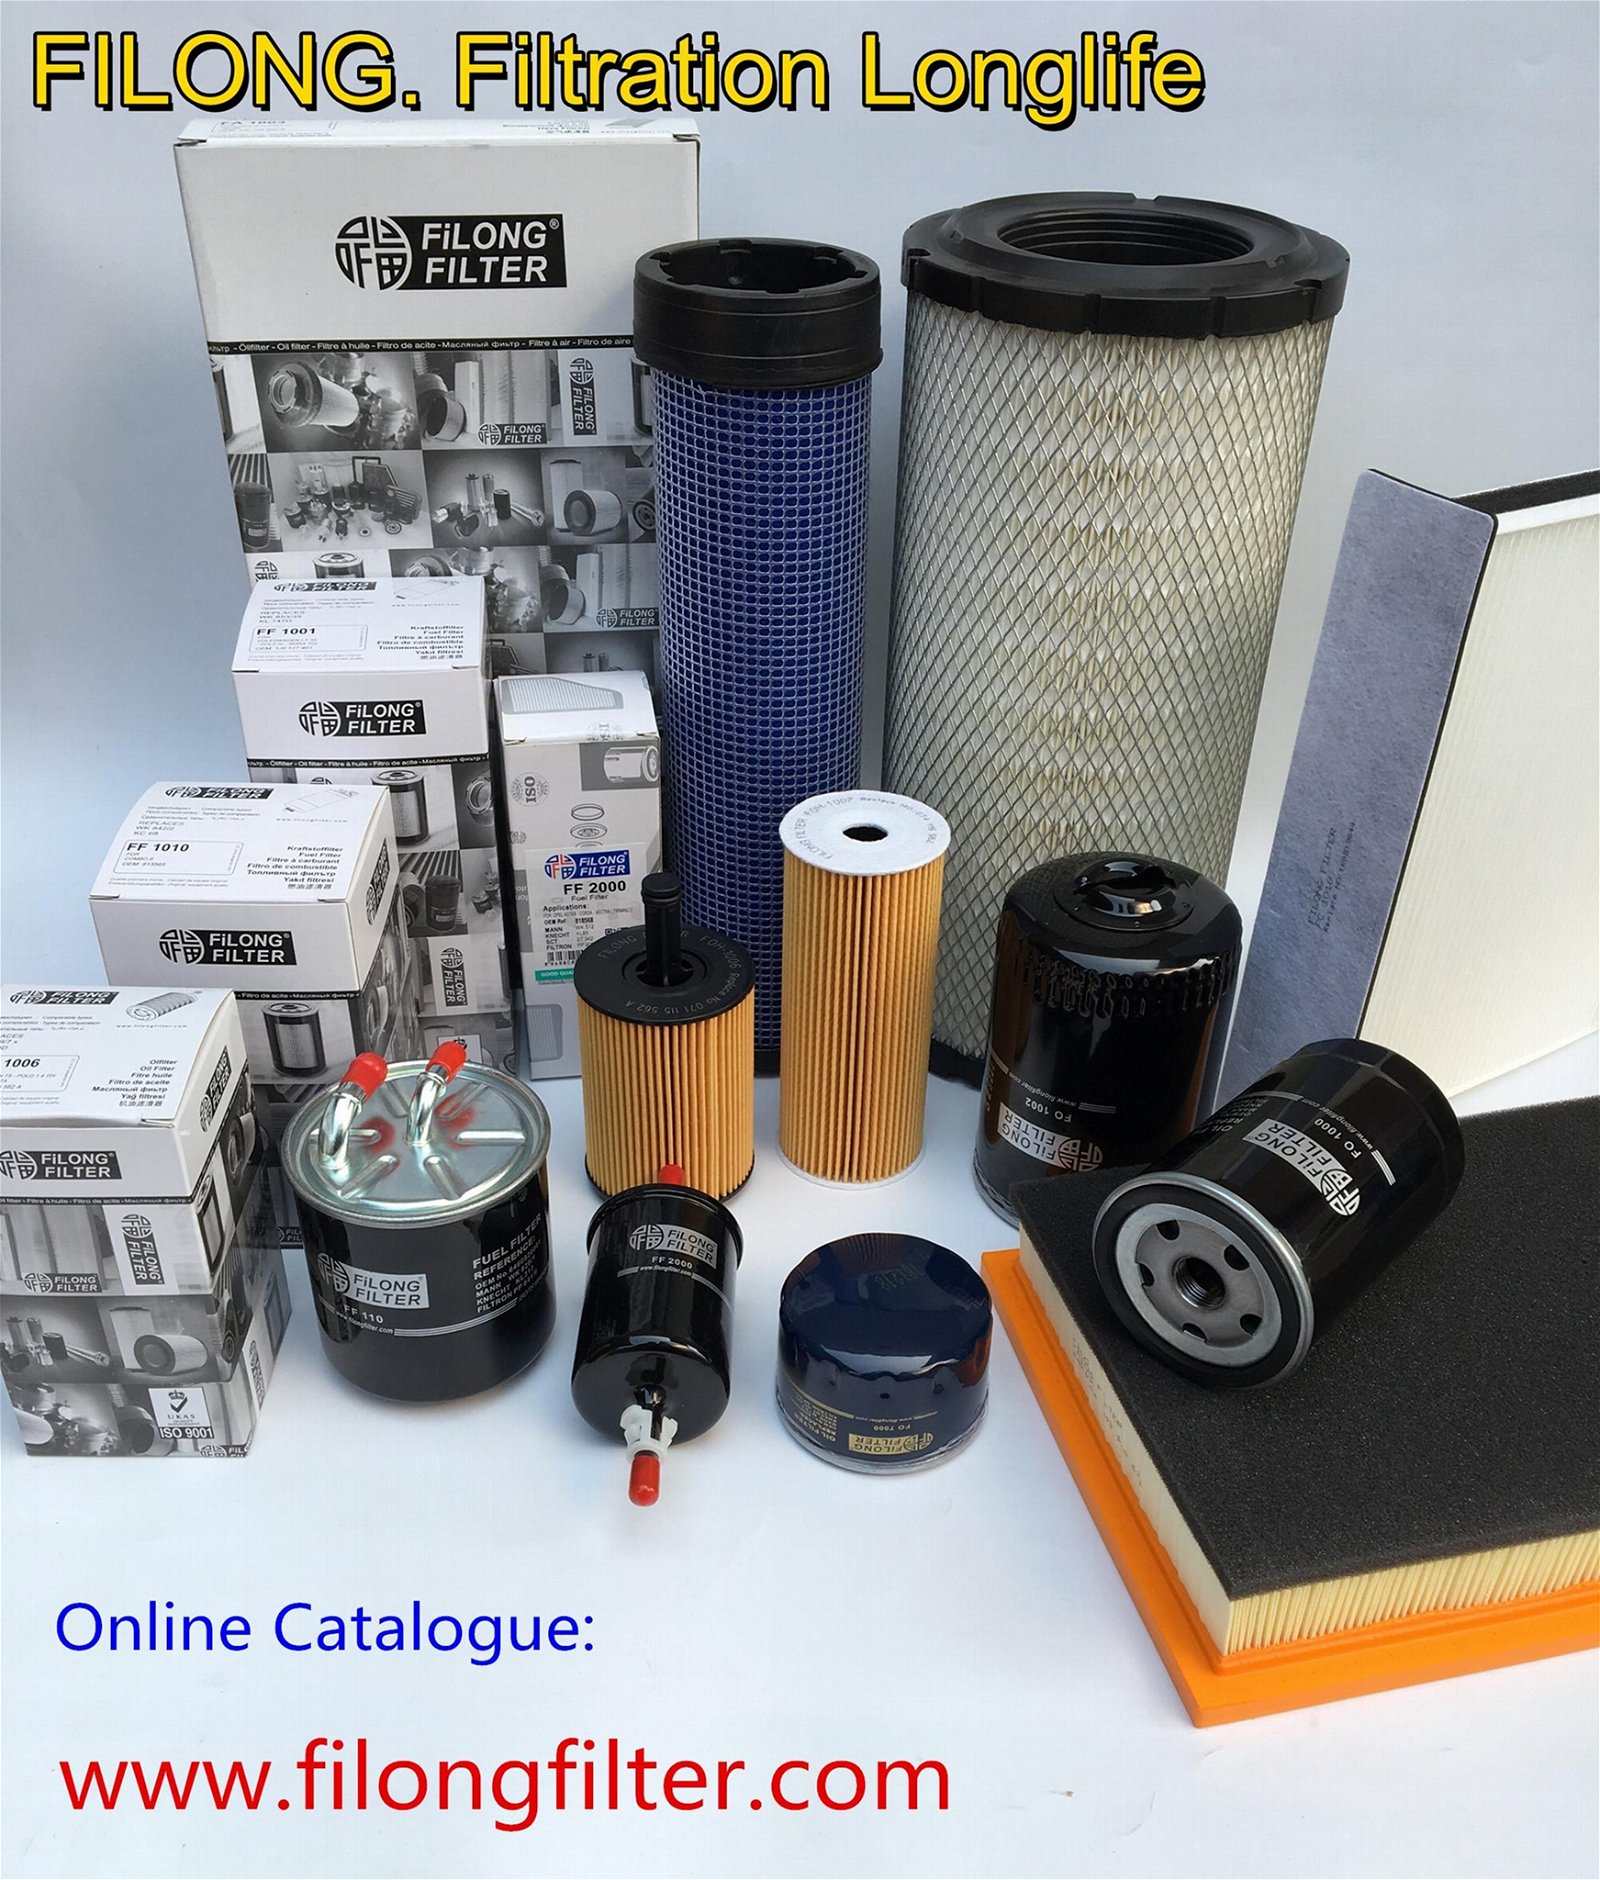 FILONG Automotive filters Manufacturers in China,Car Air Filter Suppliers In China ,FILONG Air Filters manufactory in china ,,Air Filters factory in china, automobile filters manufactory in china,China air filter supplier,